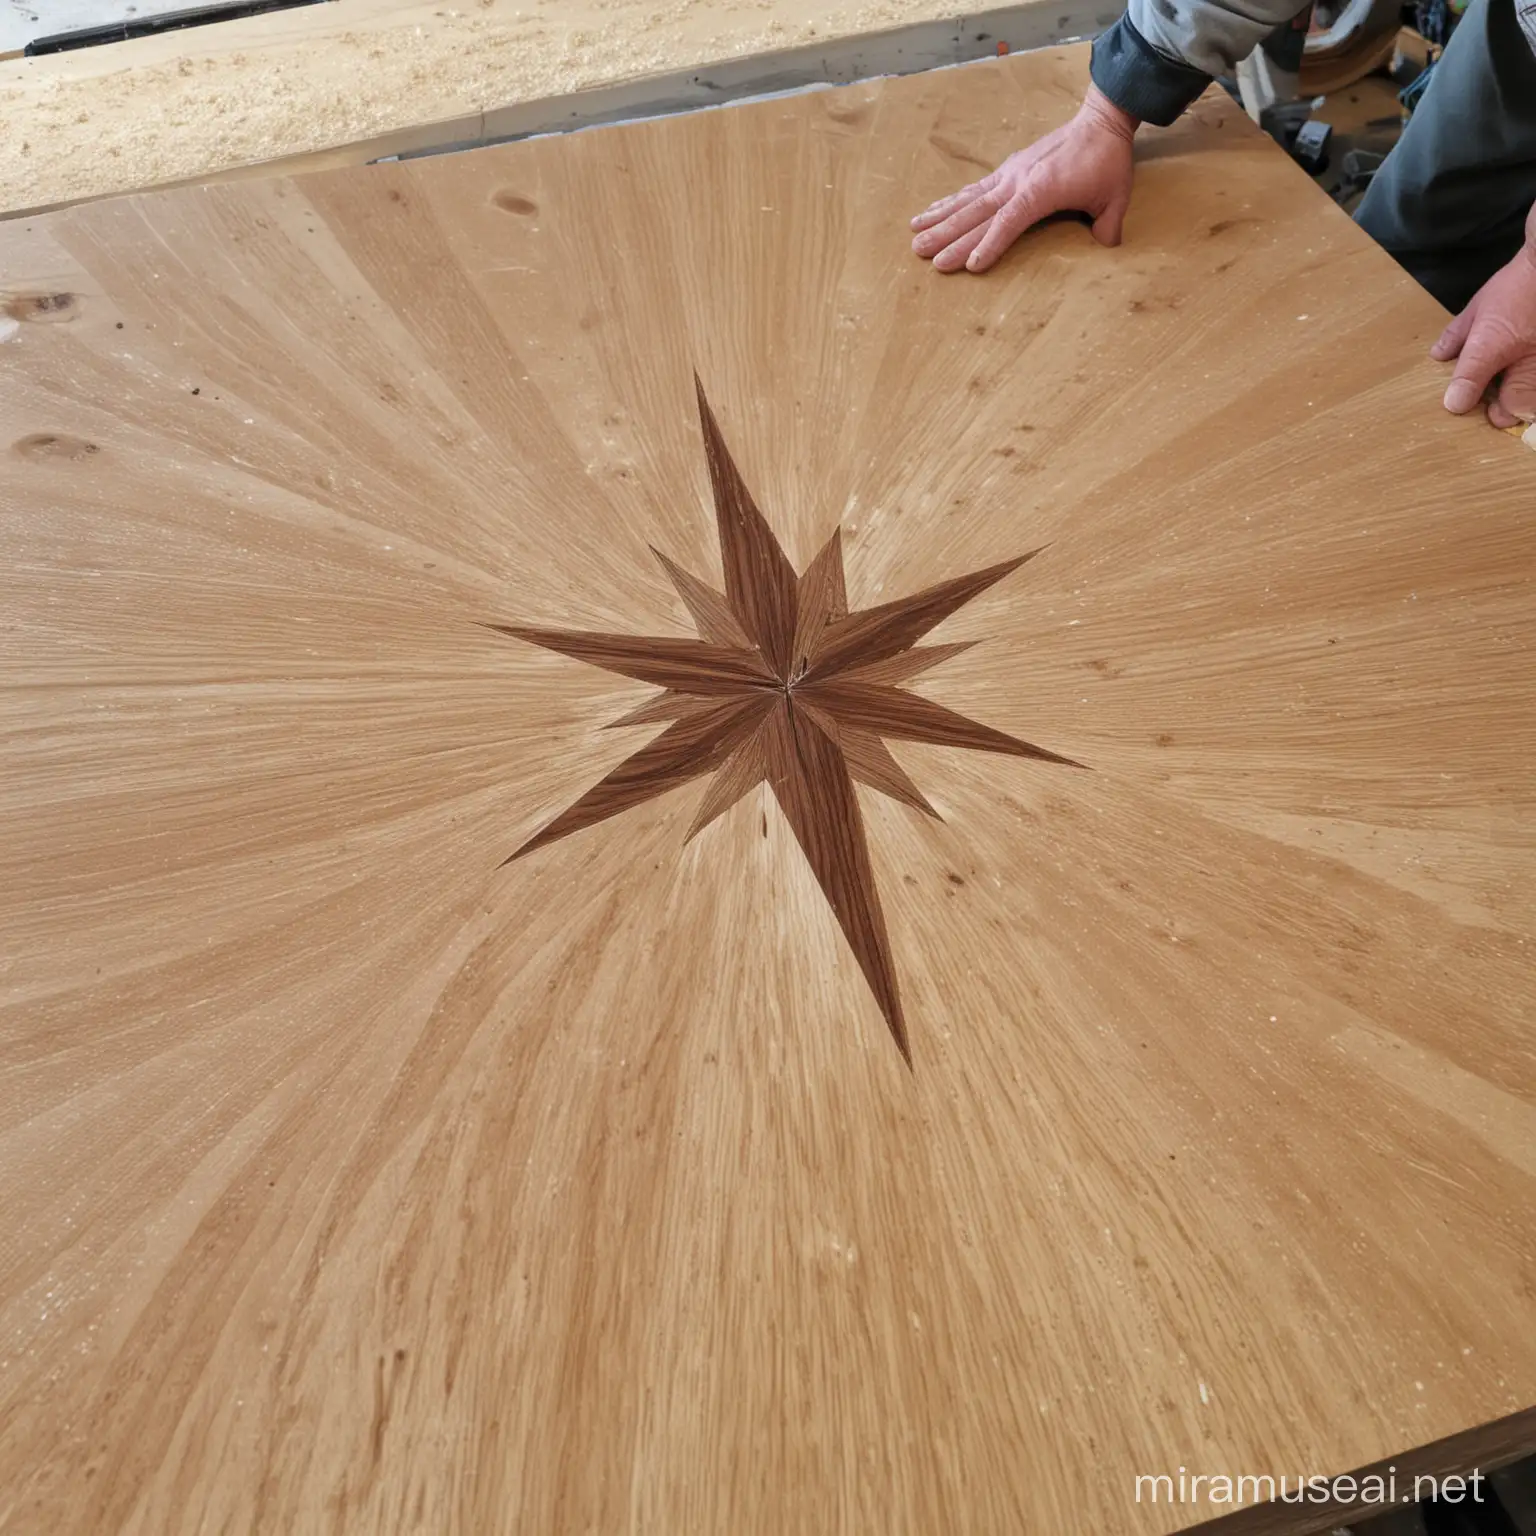 Carpentry Workshop with a Shiny North Star